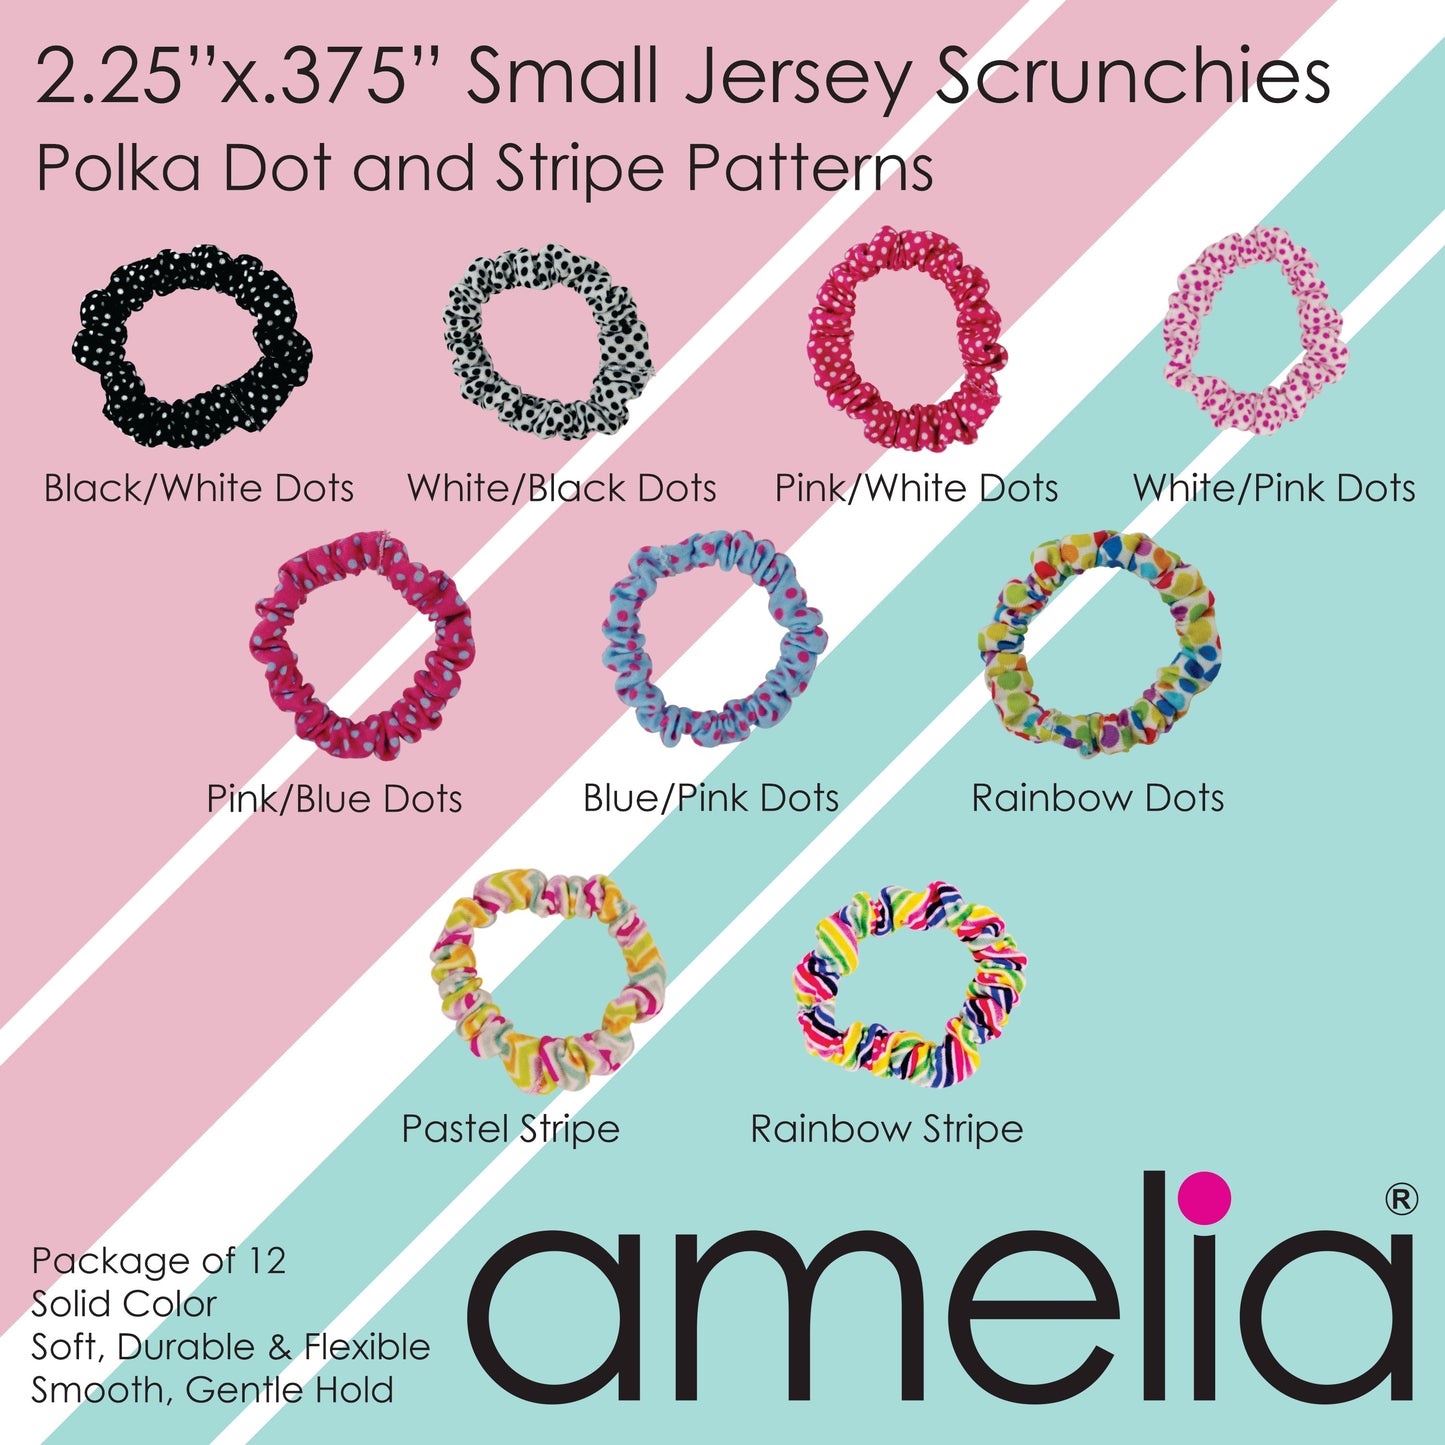 Amelia Beauty, White Jersey Scrunchies, 2.25in Diameter, Gentle on Hair, Strong Hold, No Snag, No Dents or Creases. 12 Pack - 12 Retail Packs